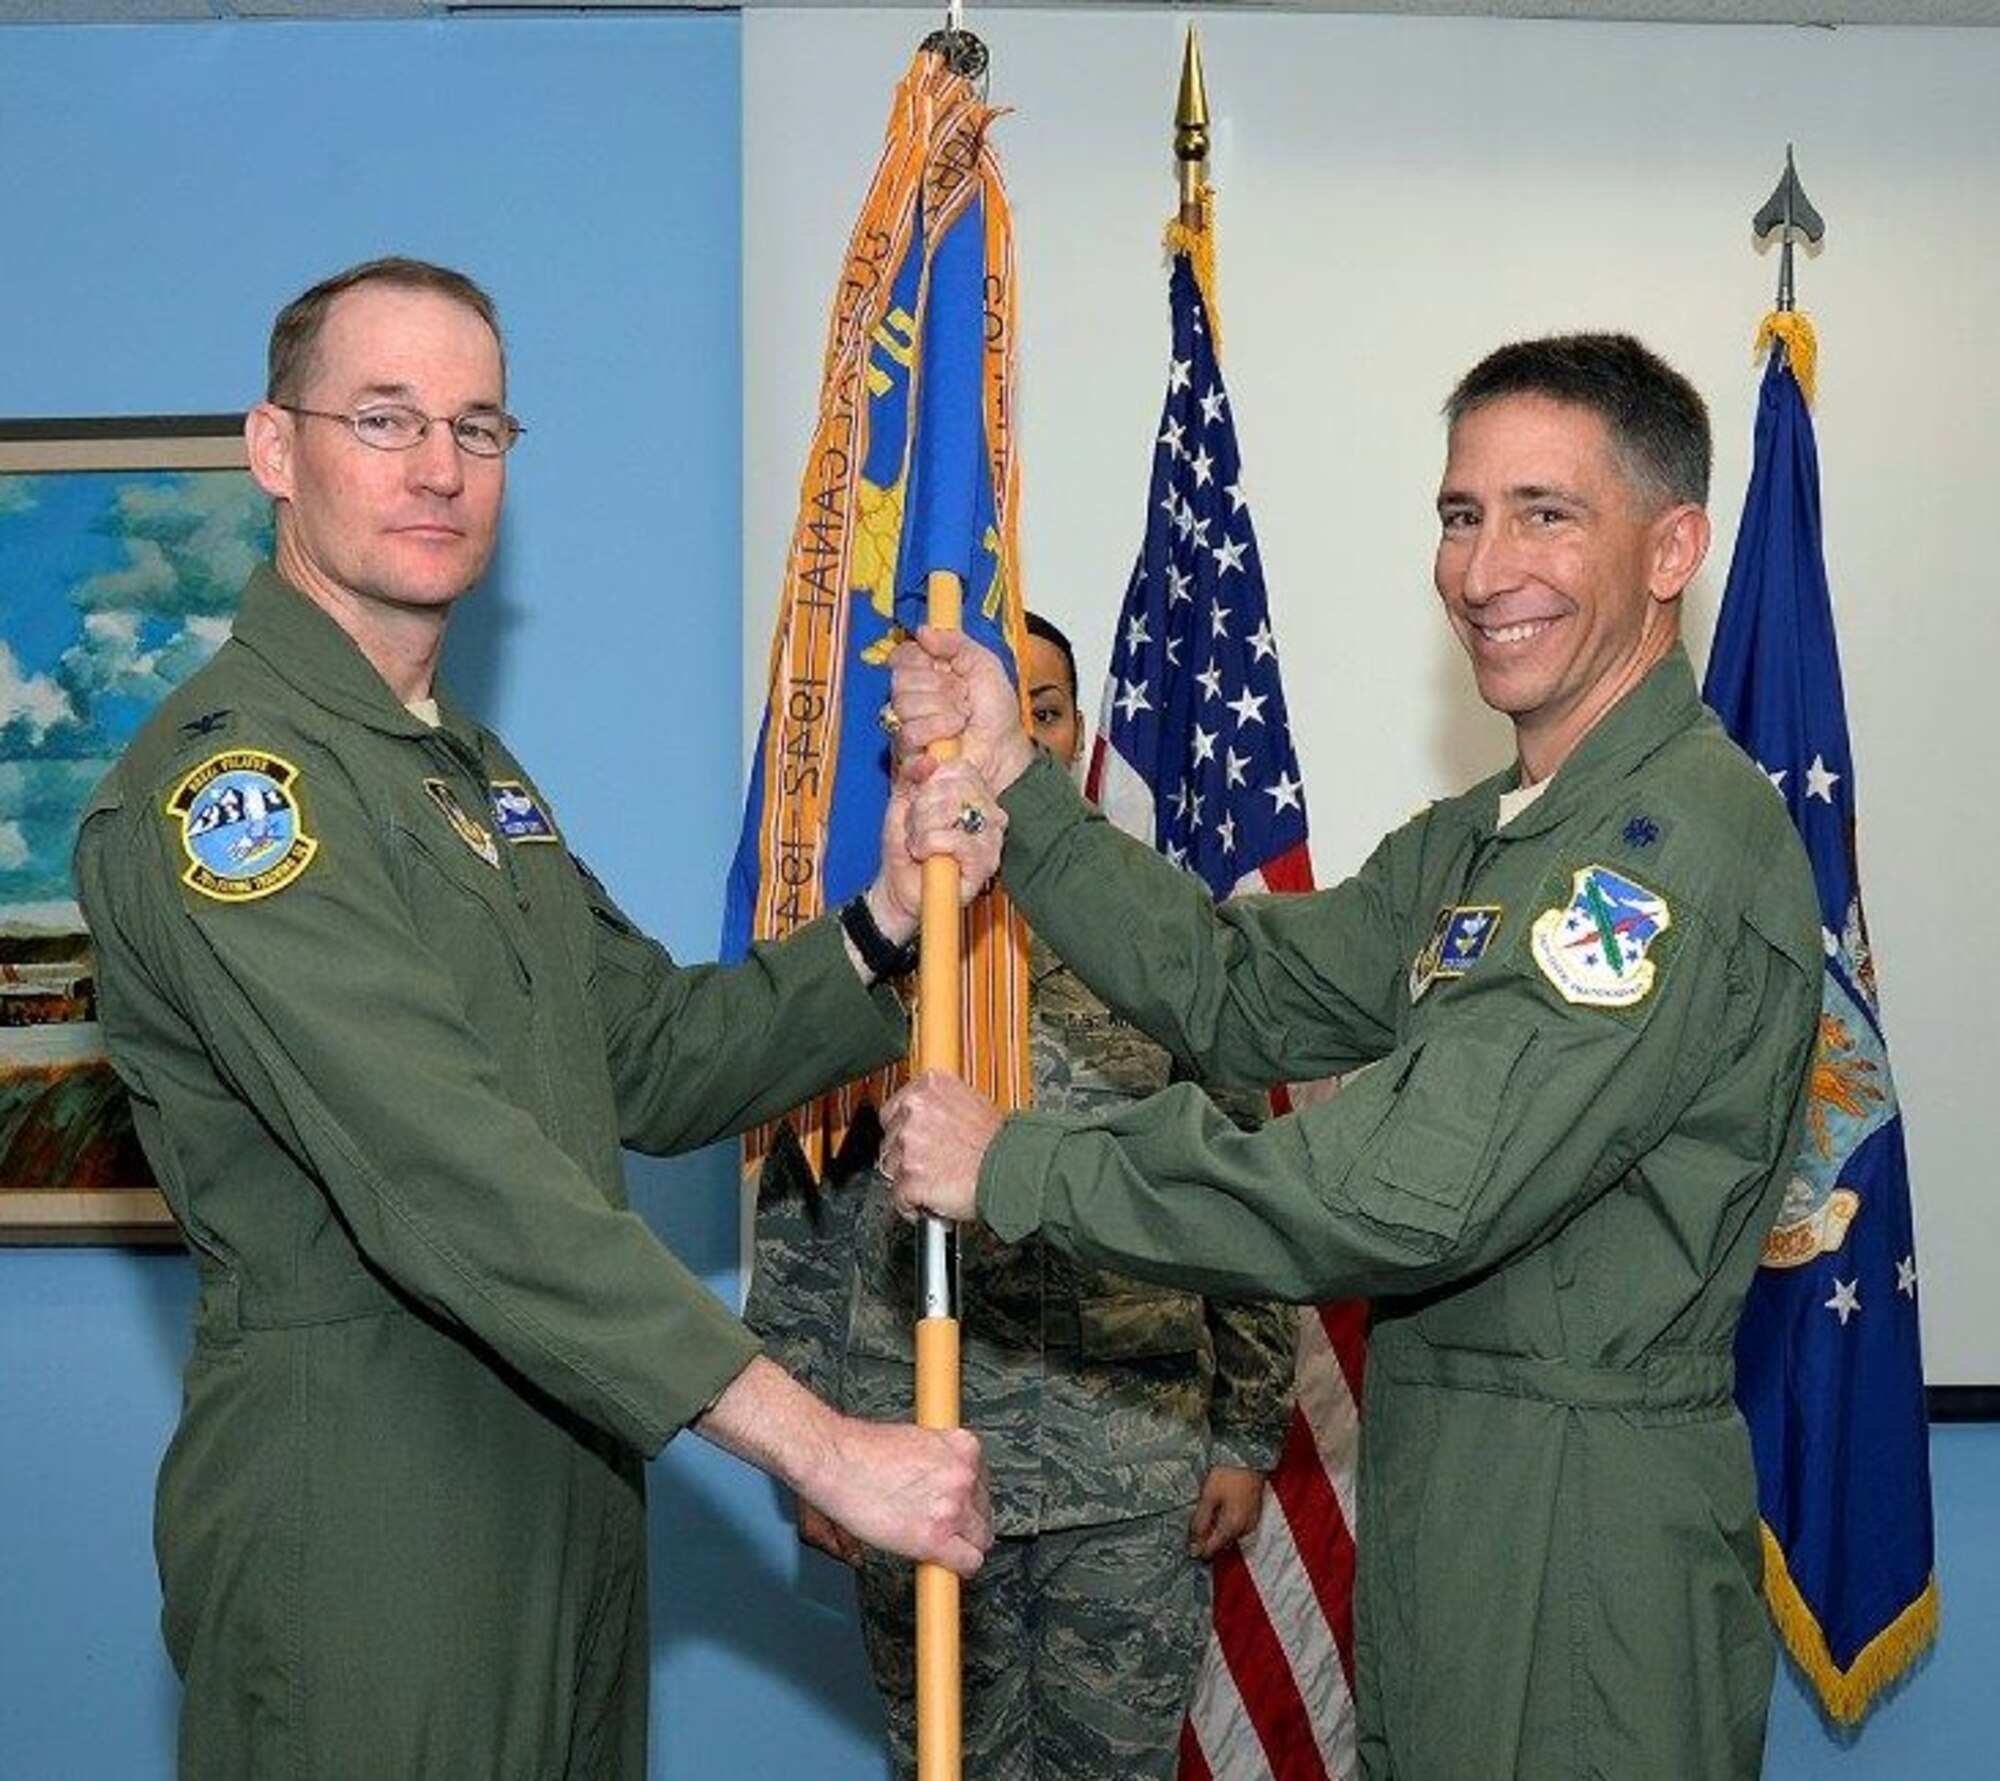 Lt. Col. Jason Cashman (right) accepts the 70 FTS guidon from Col. Roger Suro, Commander of the 340th Flying Training Group, Joint Base San Antonio-Randolph-Texas during the Change of Command Ceremony Dec. 1 at the U.S. Air Force Academy. These ceremonies represent the formal passing of responsibility, authority and accountability of command from one officer to another. (U.S. Air Force photo).